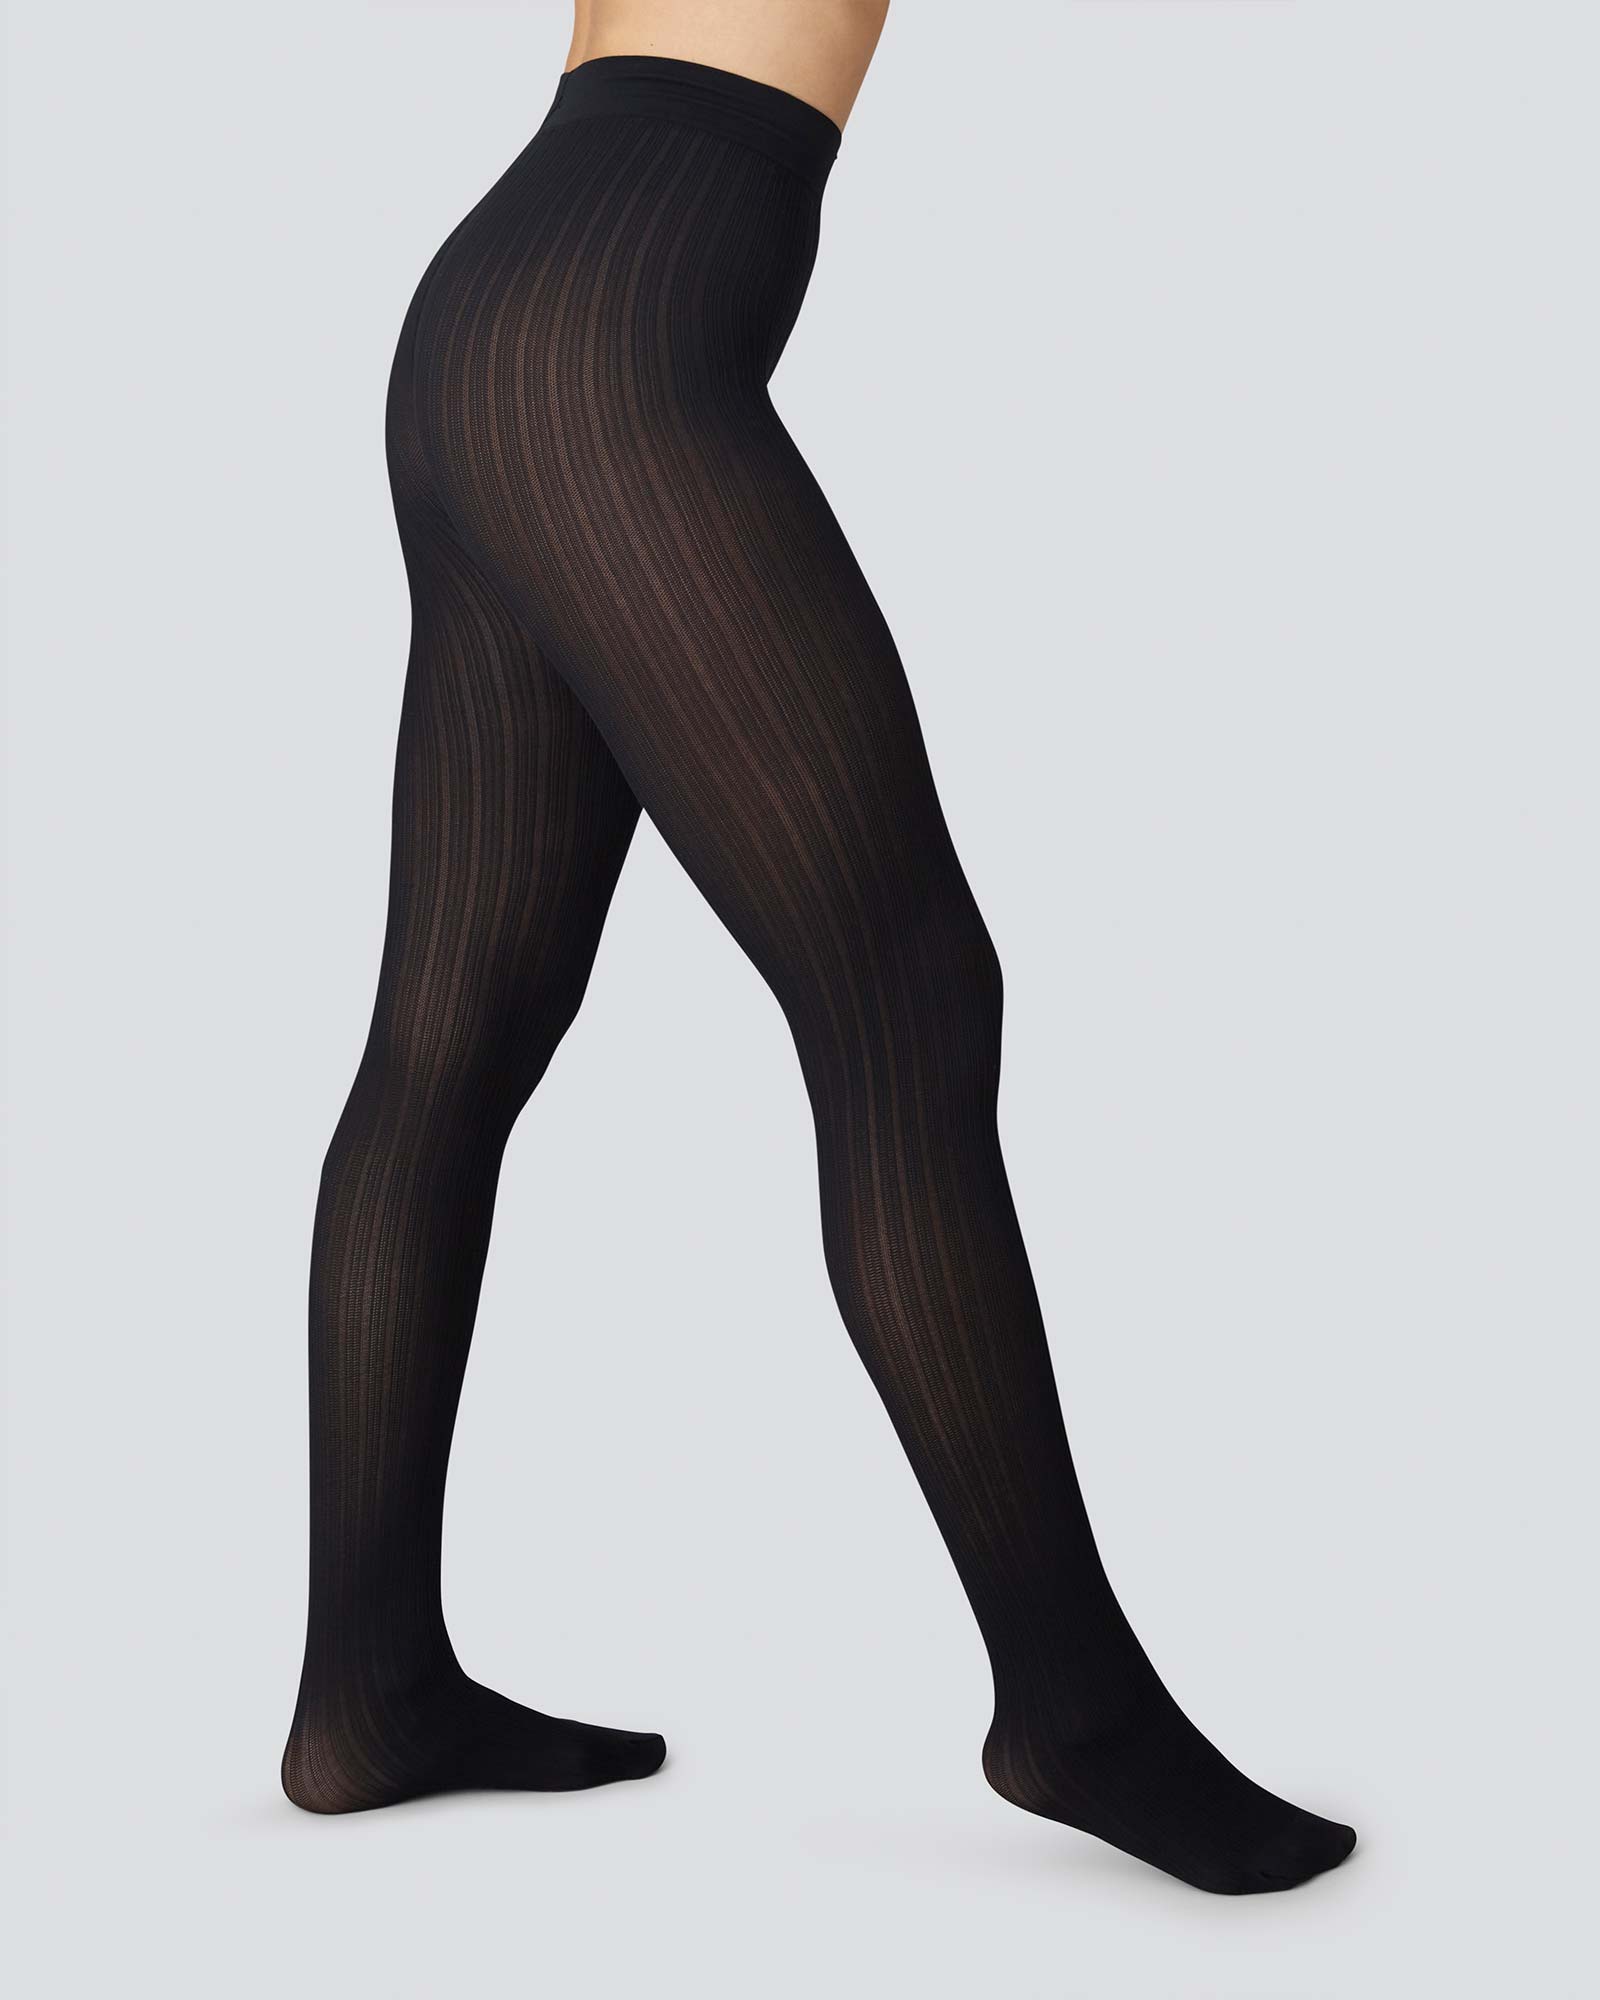 Denier tights guide: what 'denier' means and how each number looks - Yahoo  Sports